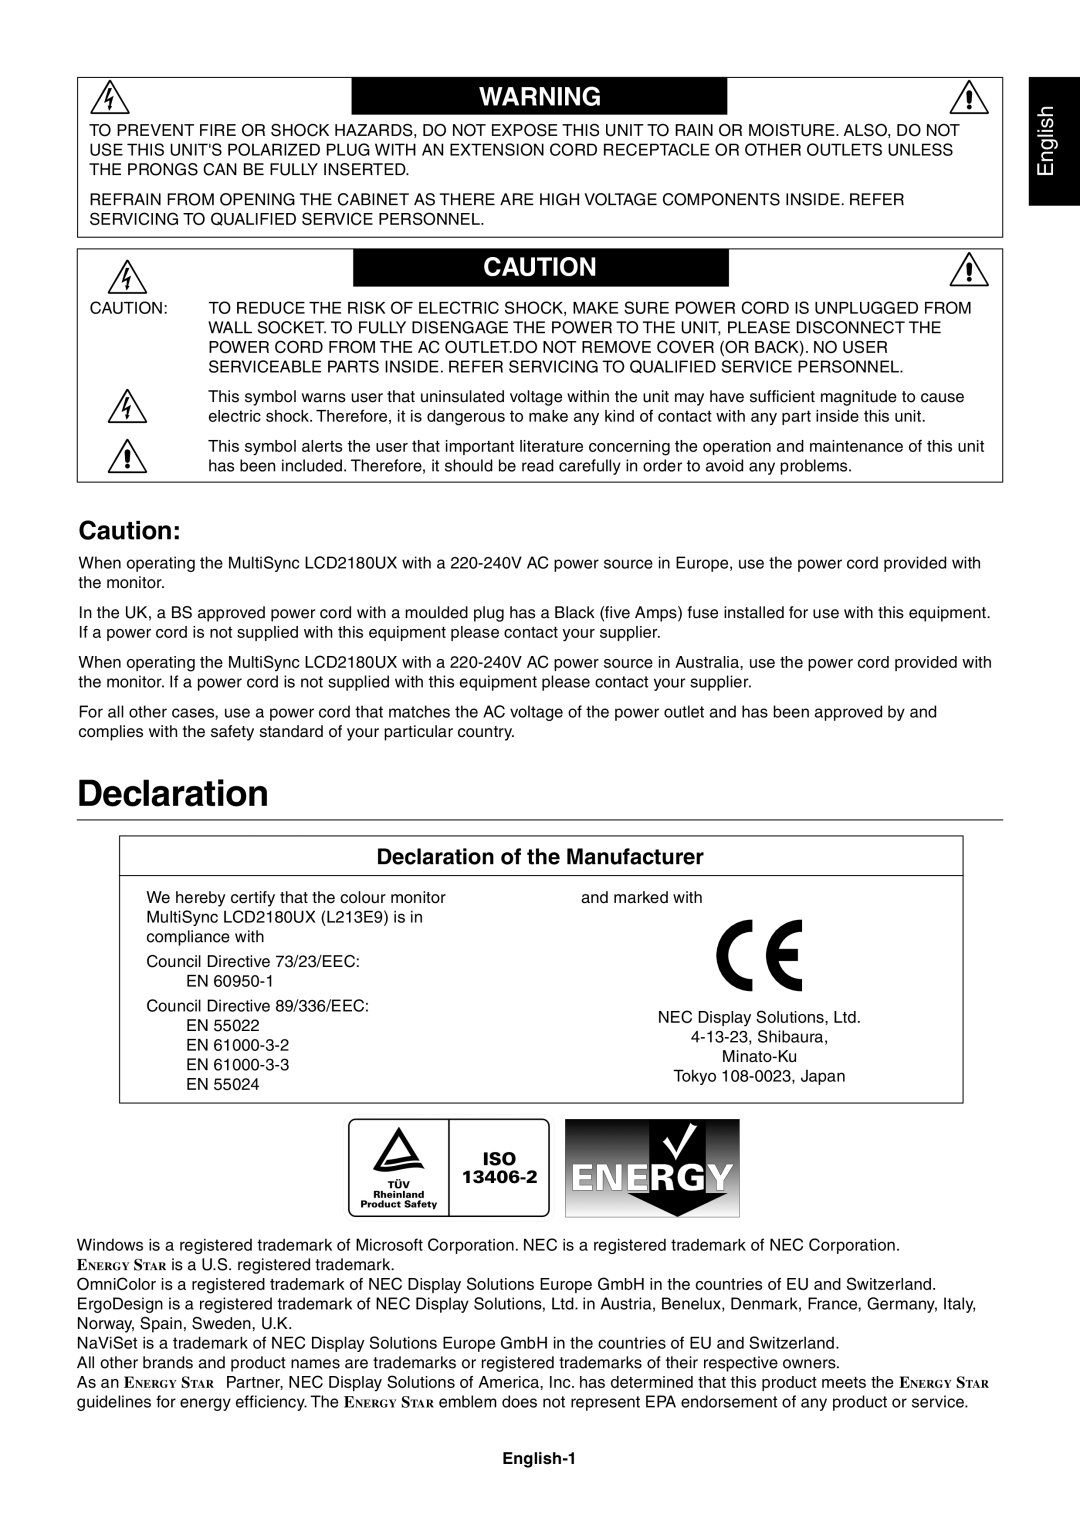 StarTech.com LCD2180UX user manual Declaration of the Manufacturer, English-1 